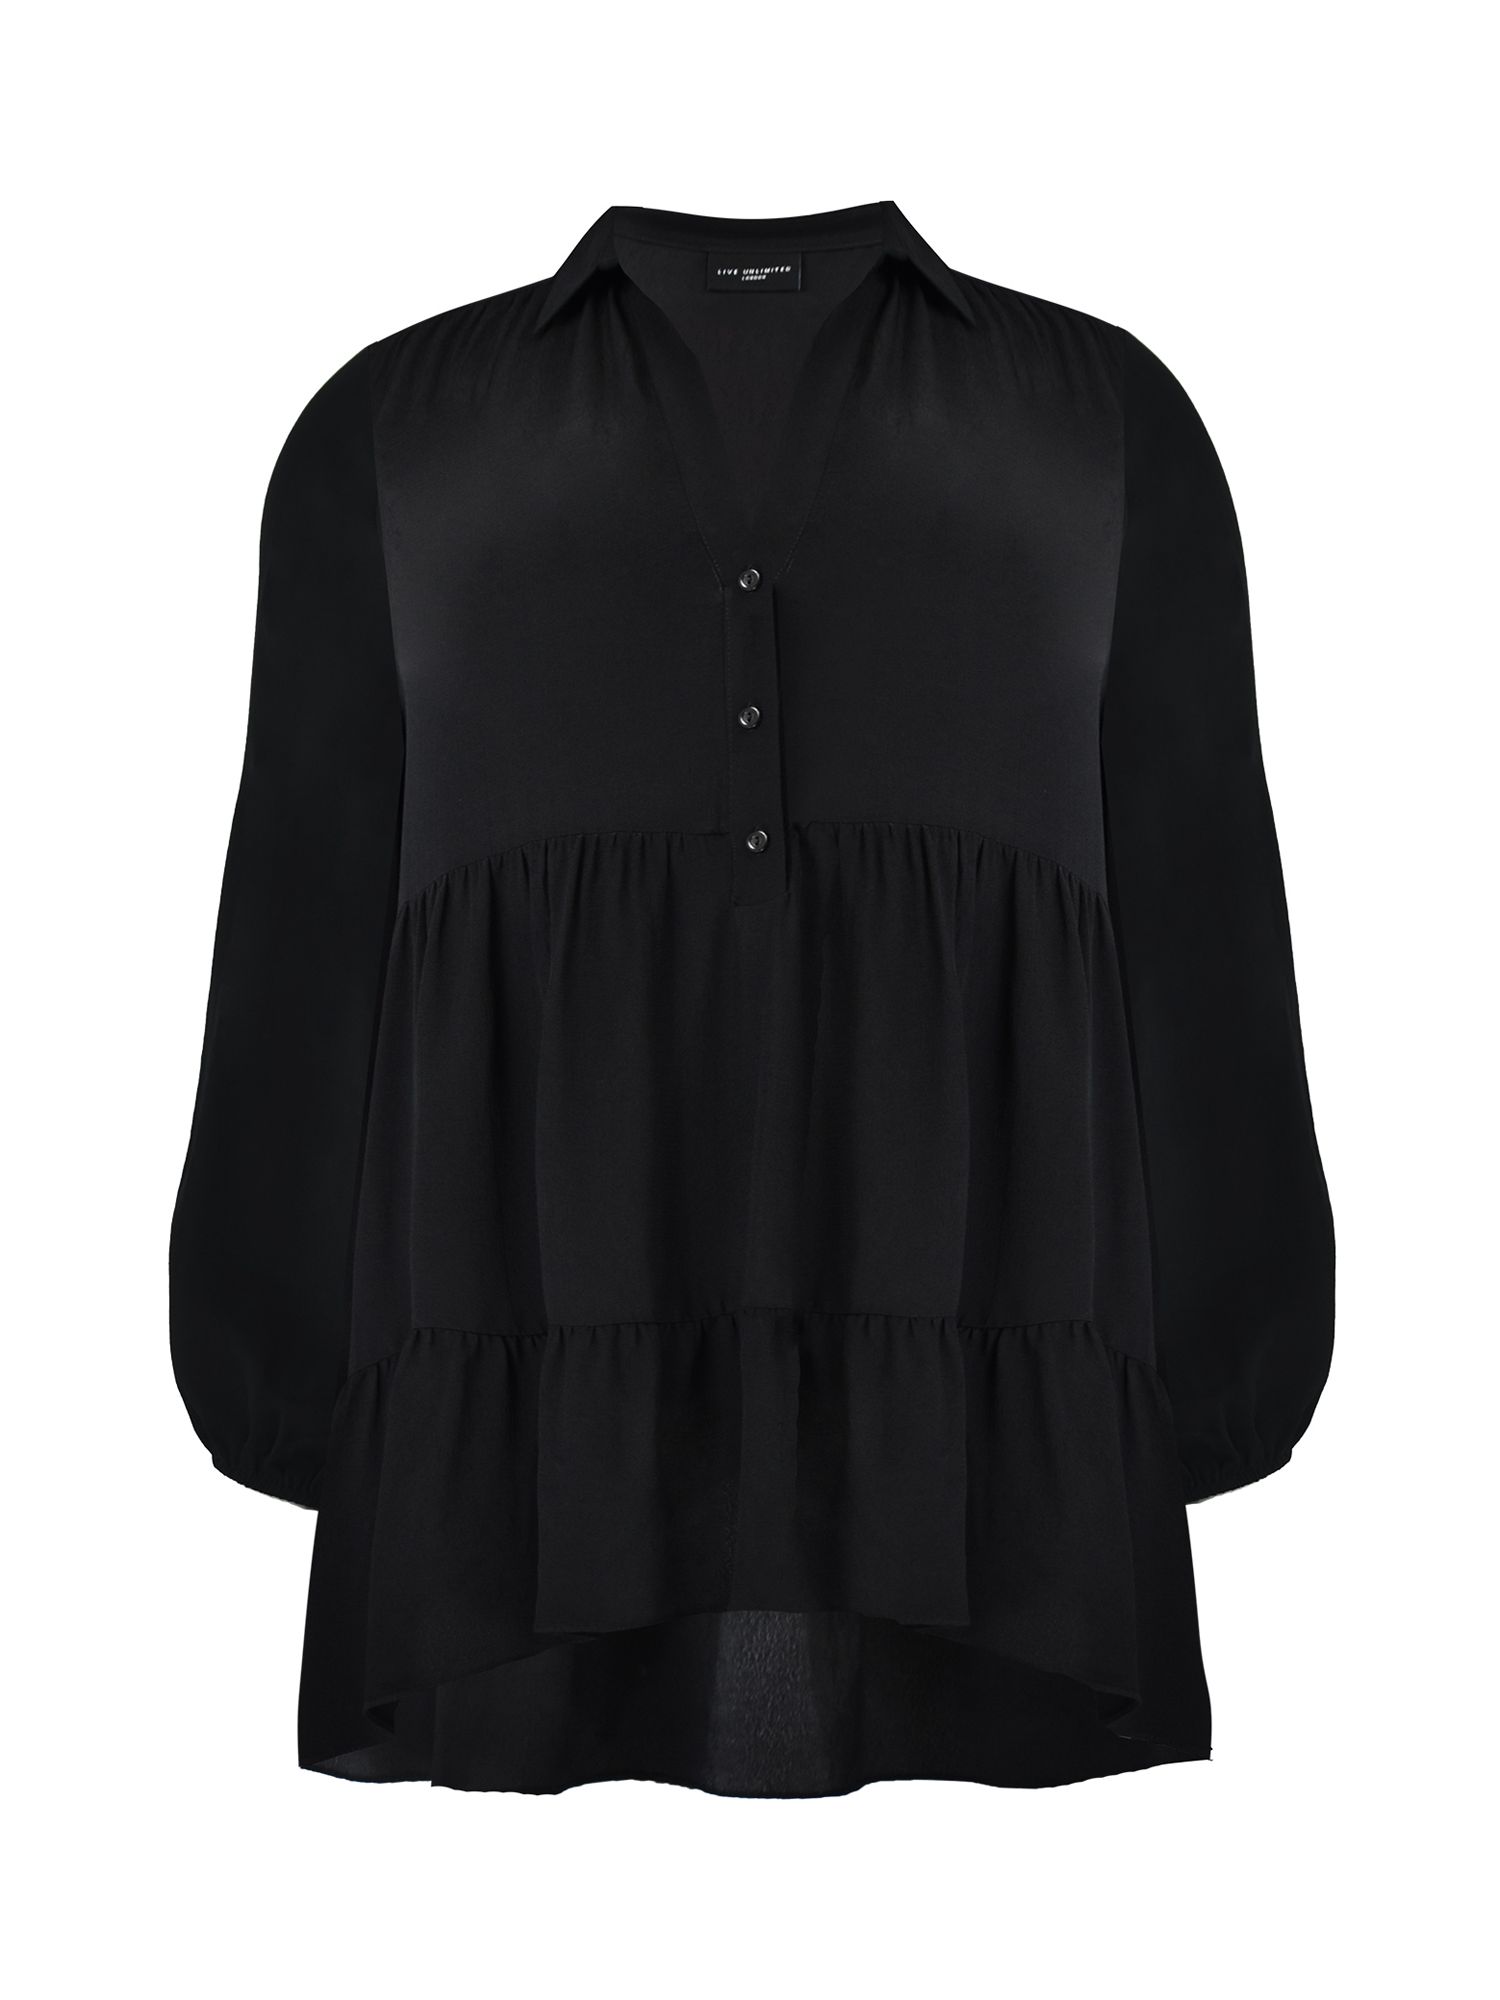 Live Unlimited Curve Tiered Tunic Top, Black at John Lewis & Partners